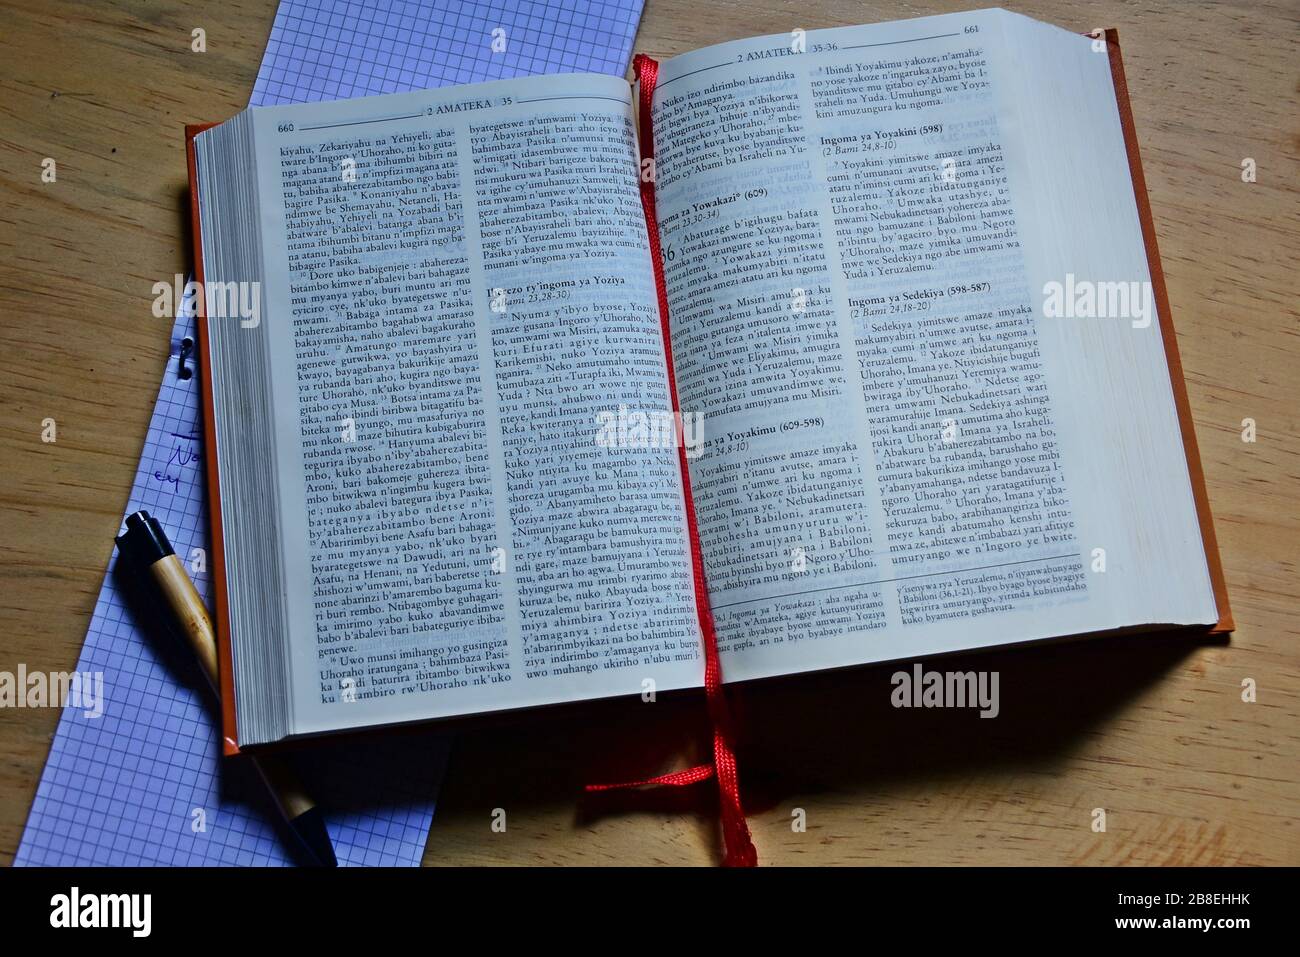 Open Kinyarwanda Catholic Holy Bible with a notebook and pen on a wooden table Stock Photo